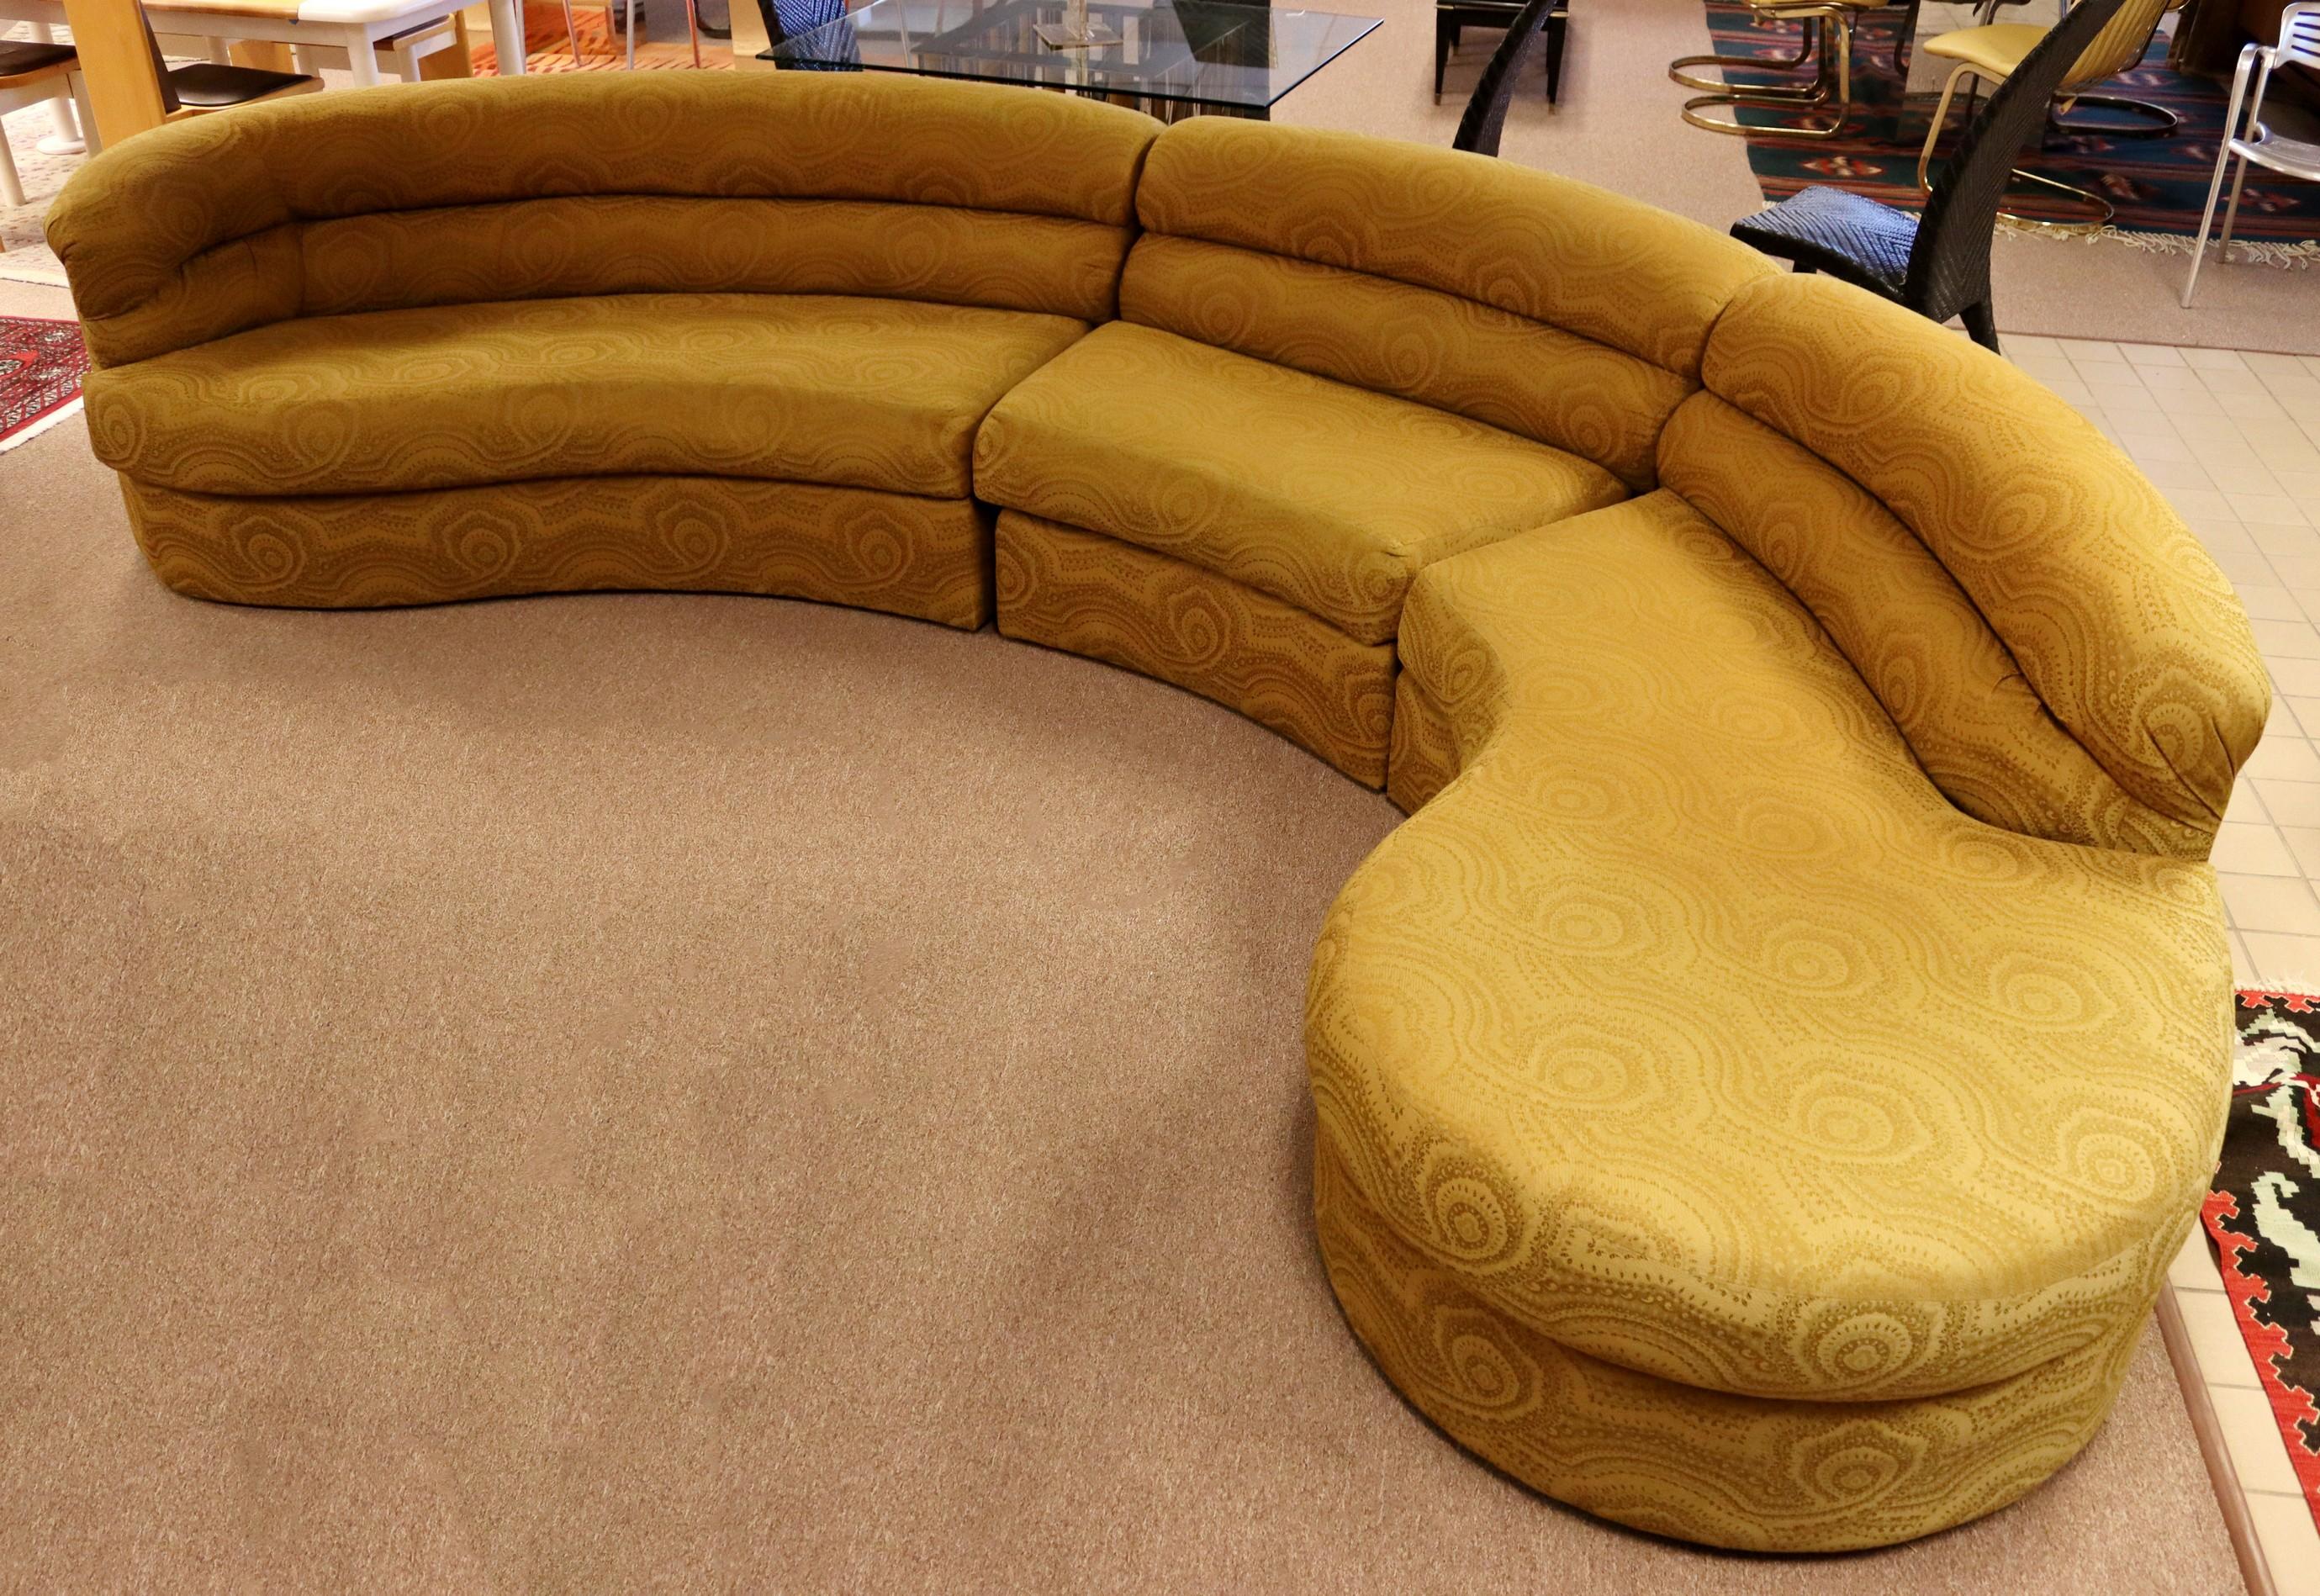 American Contemporary Modern Directional Sculptural Serpentine Sofa Sectional, 1980s